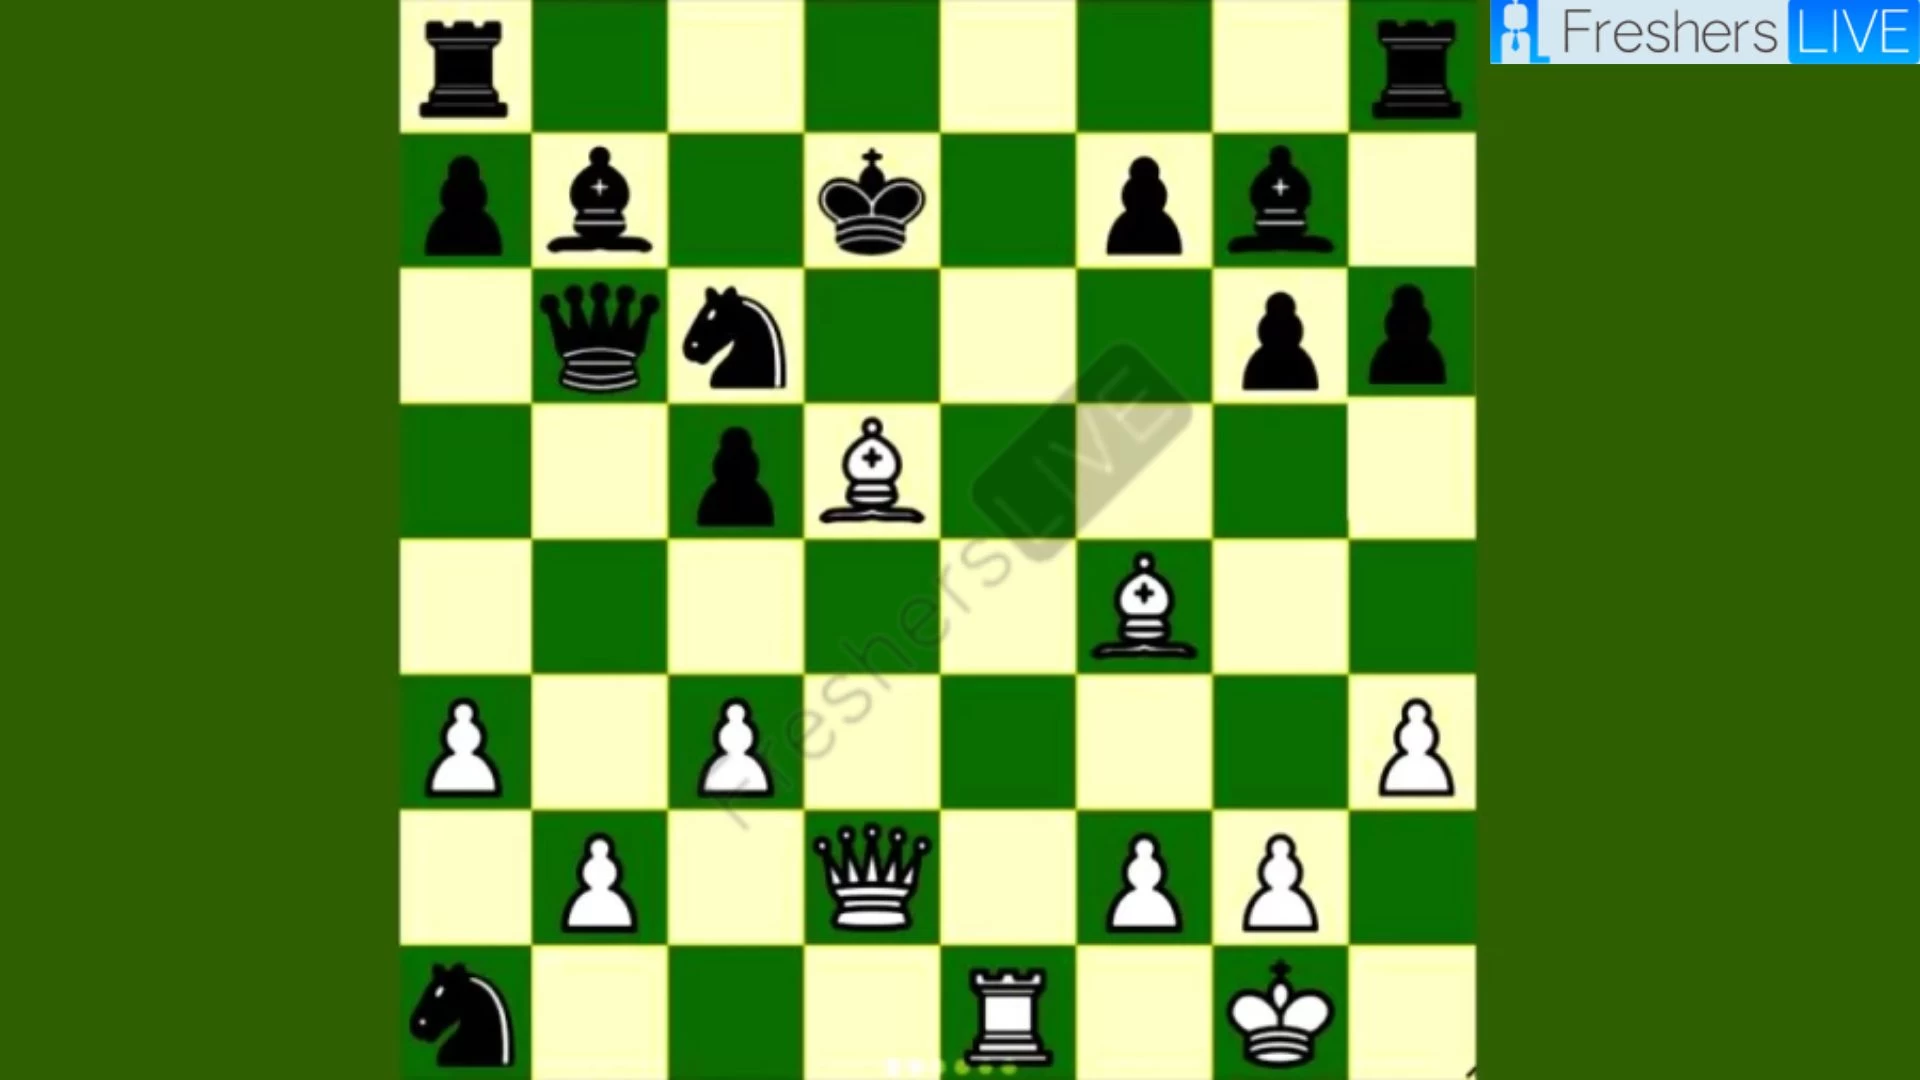 Can you achieve checkmate in just three moves?